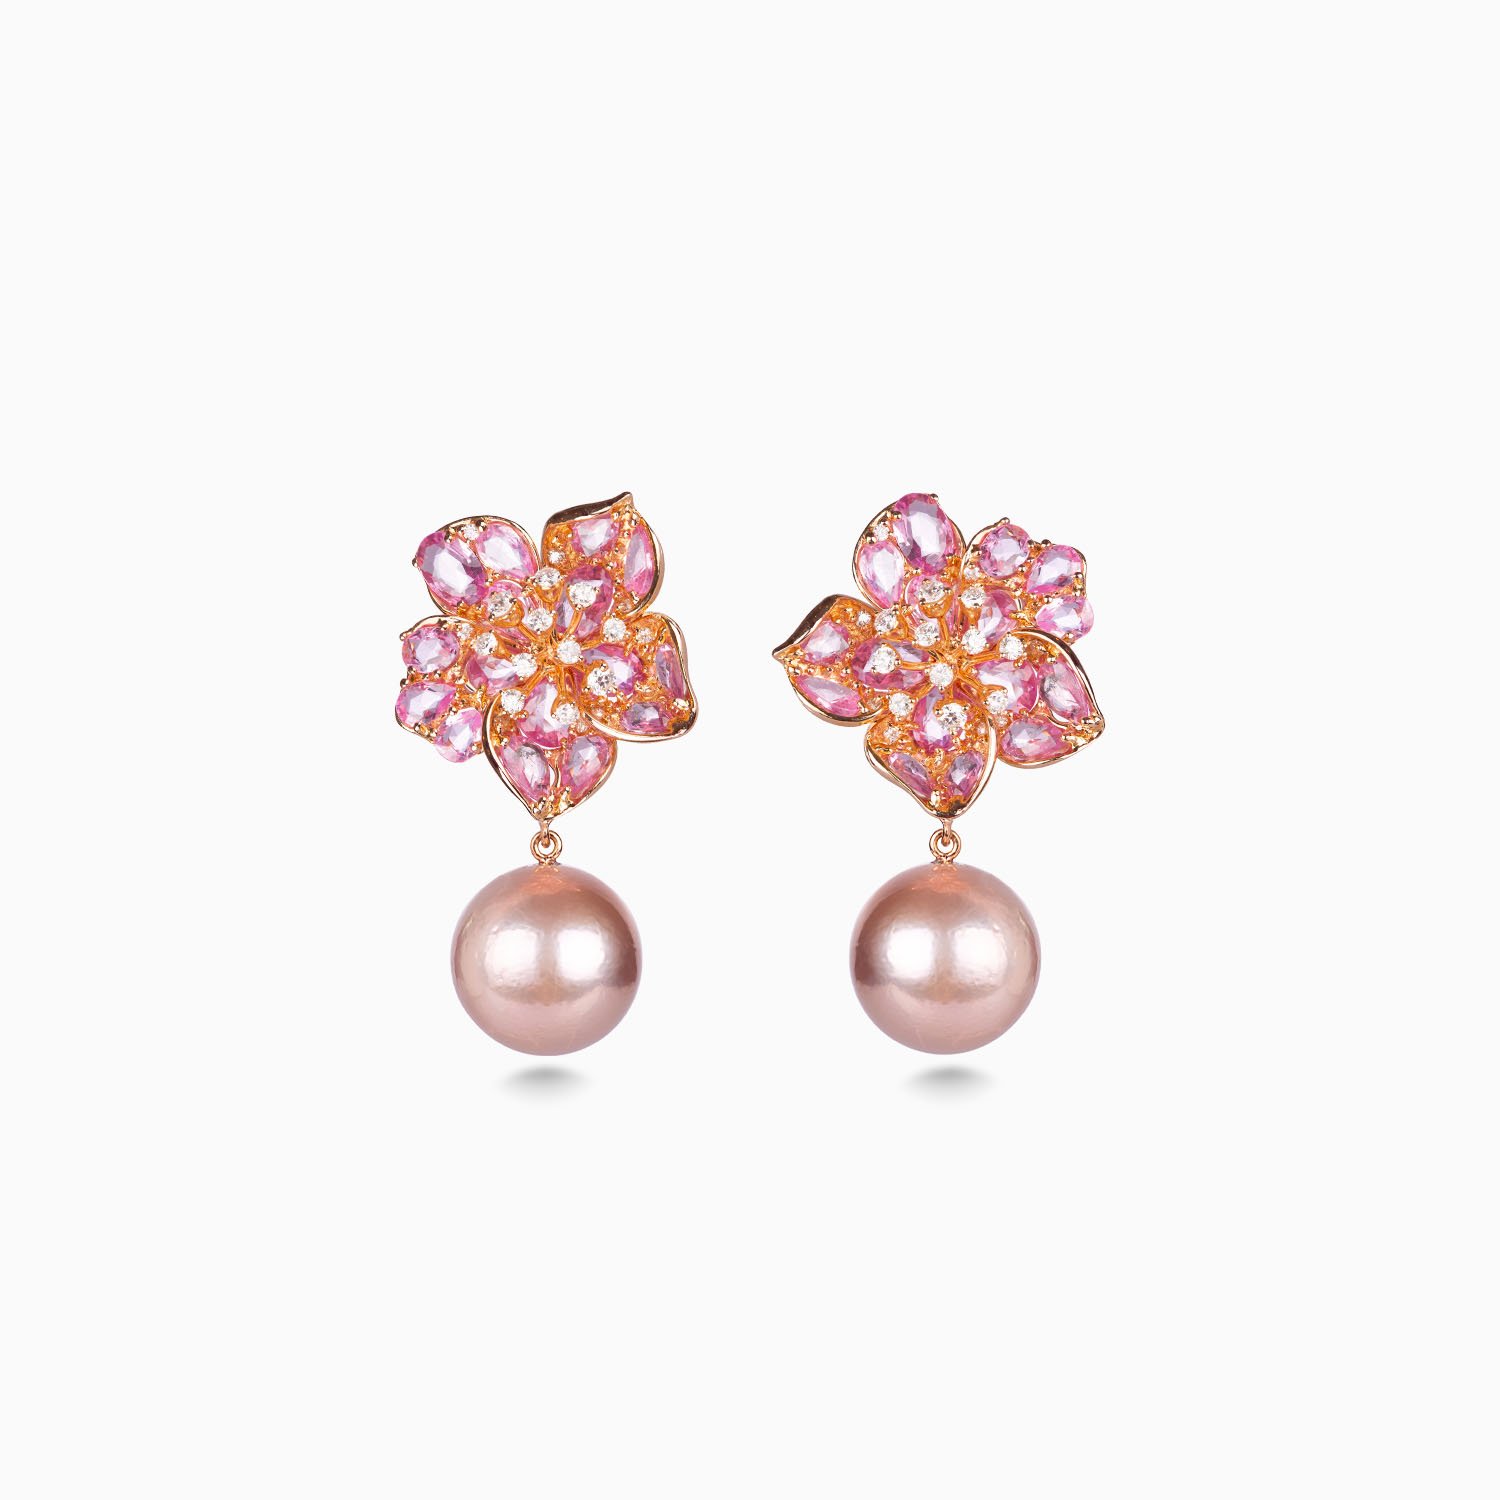 Delphinium Rose Gold Diamond and Pink Sapphire Flower Earring With Pearl.jpg